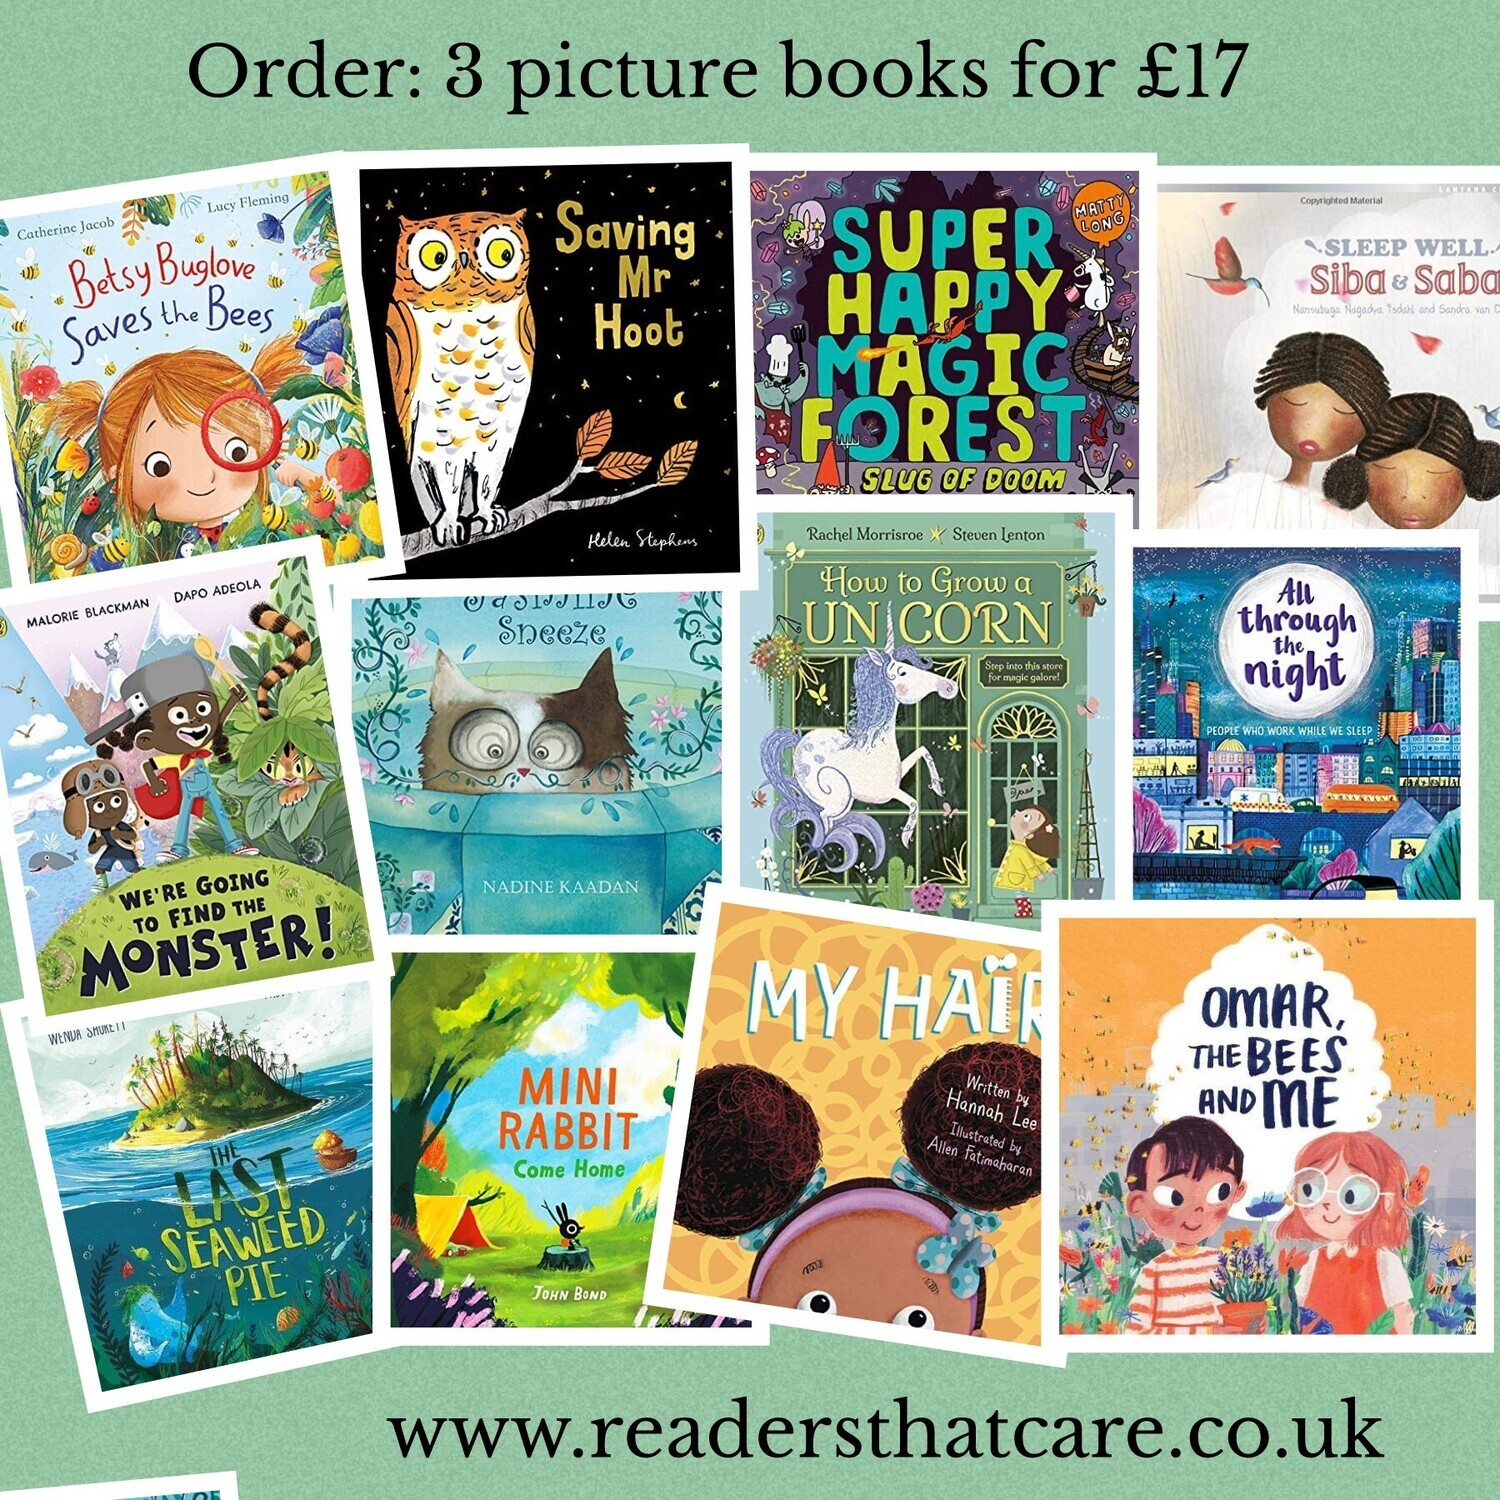 Order: 3 Picture books from Selection + mystery book